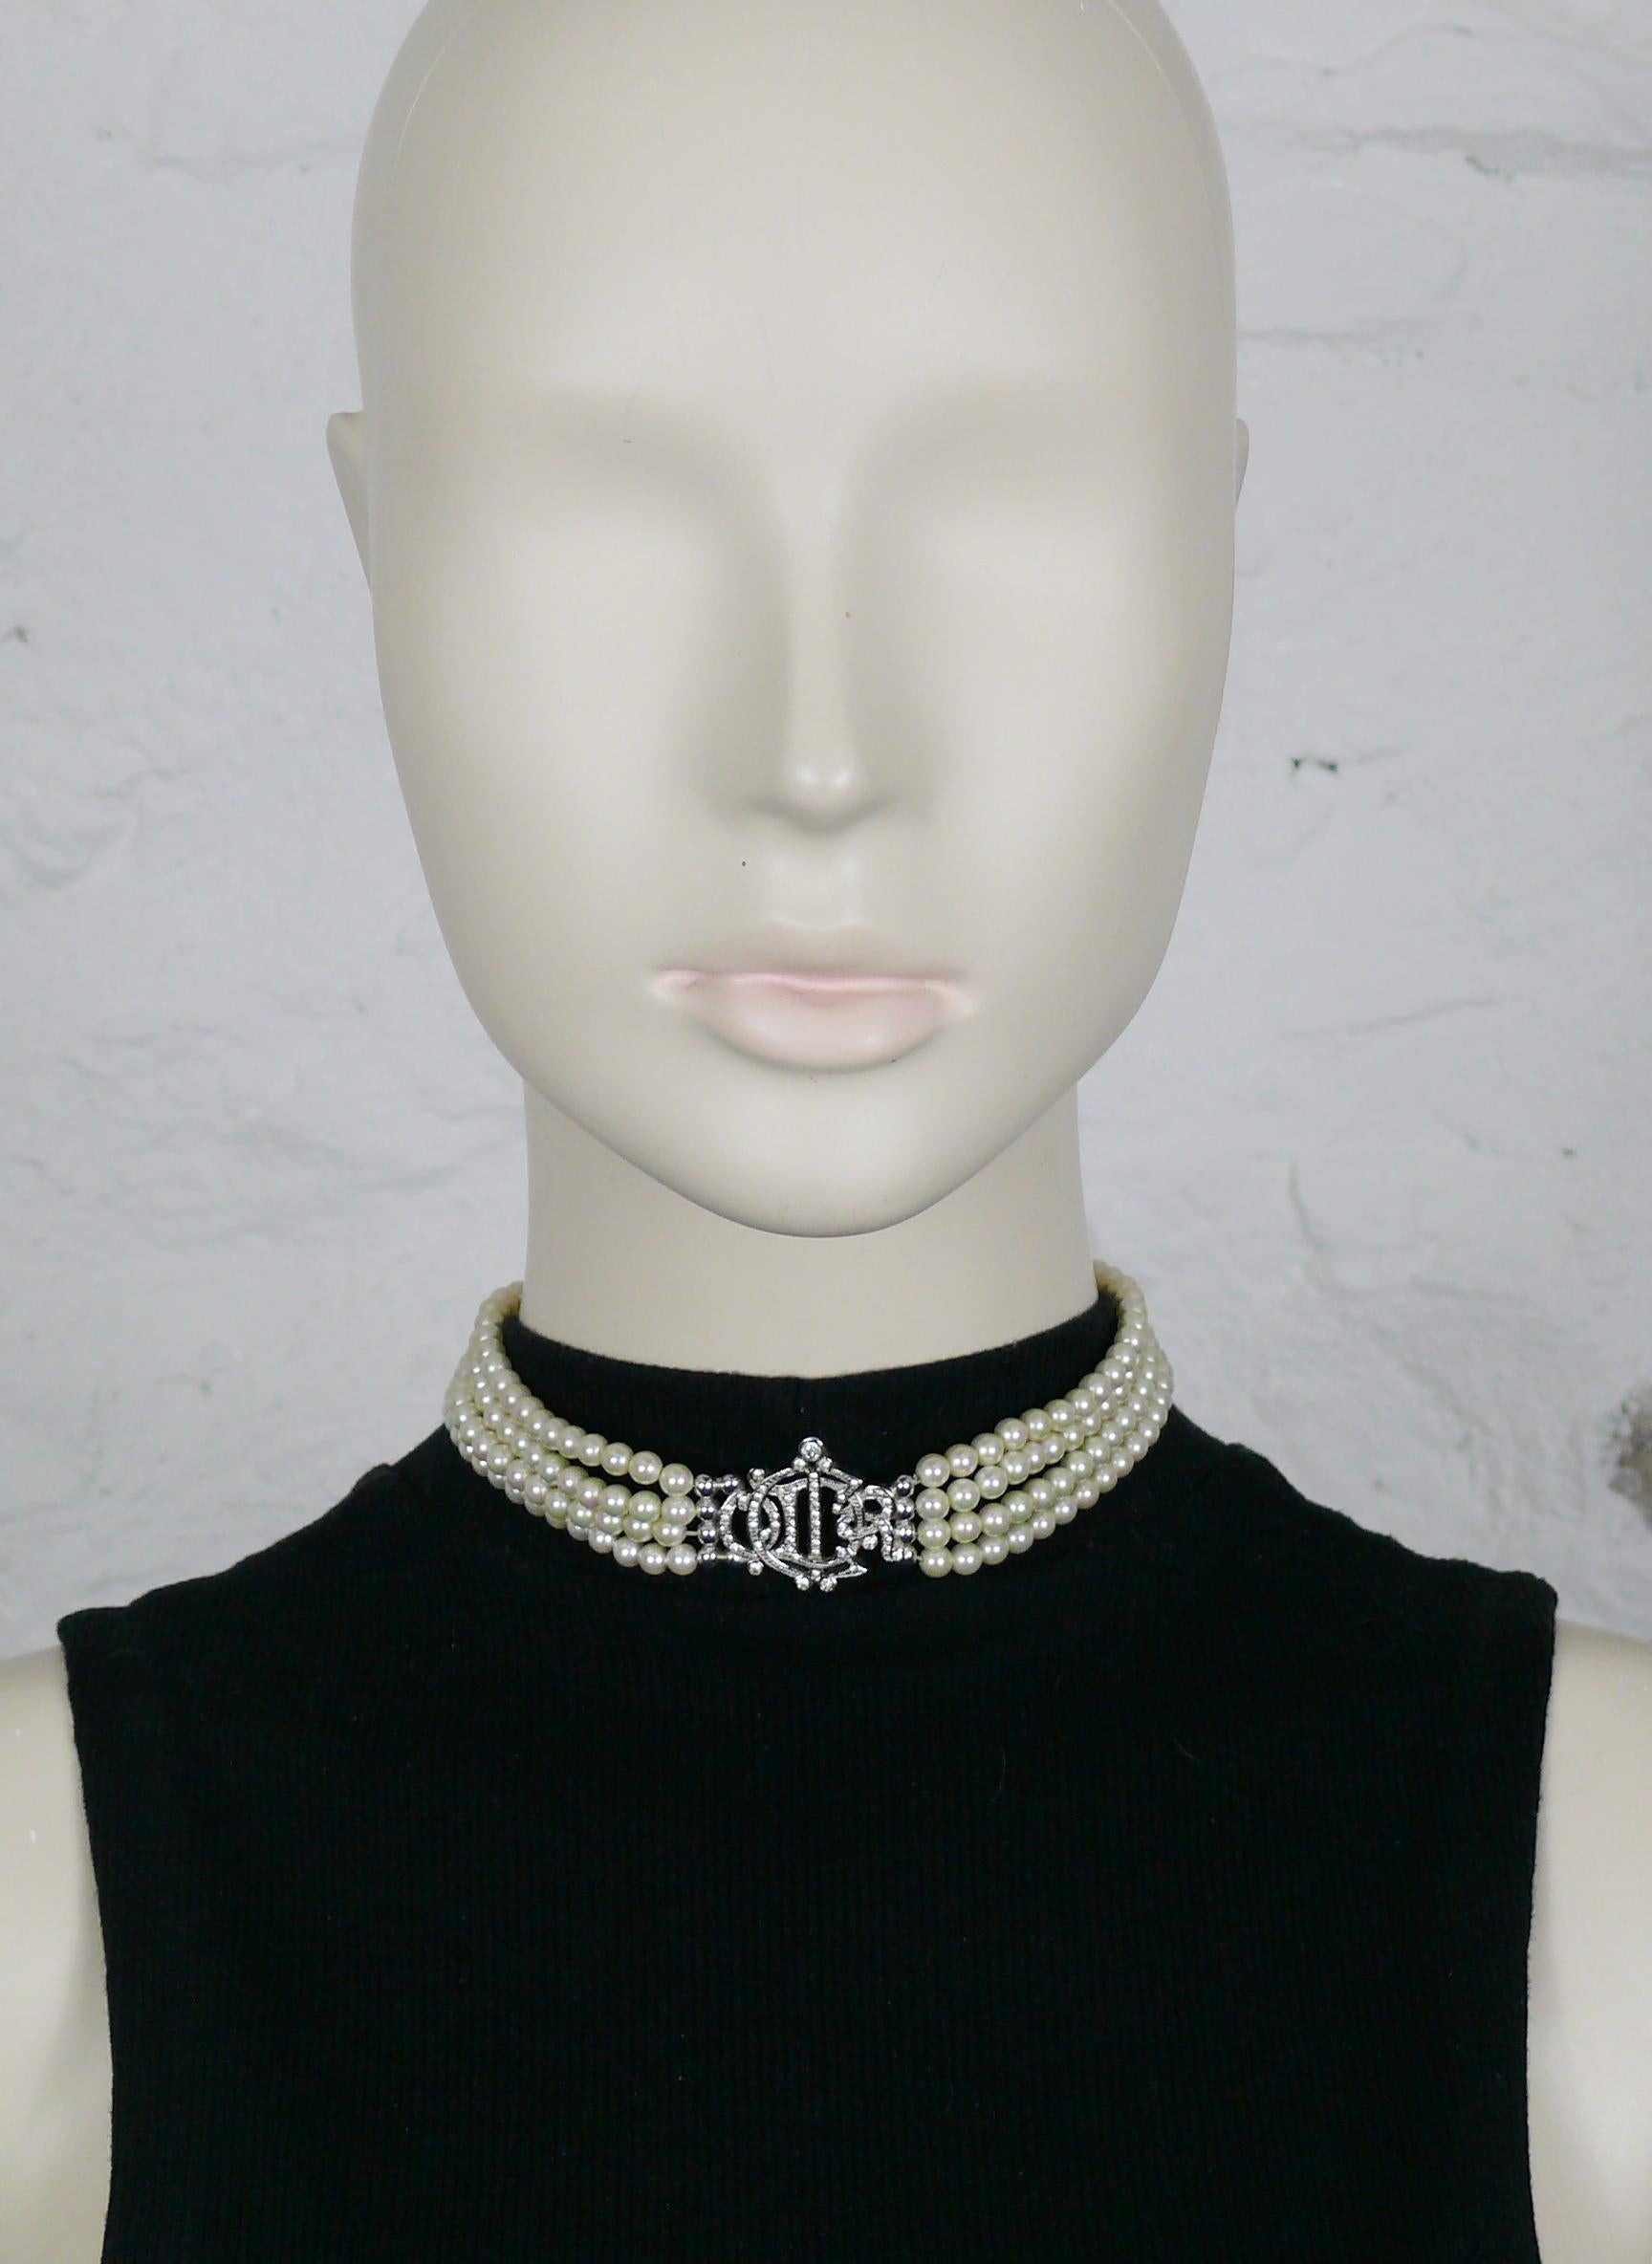 CHRISTIAN DIOR vintage choker necklace featuring four strands of off-white faux pearls and a silver toned C  D I O R logo embellished with clear crystals.

Silver tone metal hardware.

Secure clasp closure.
Extension chain.

Embossed CHR DIOR